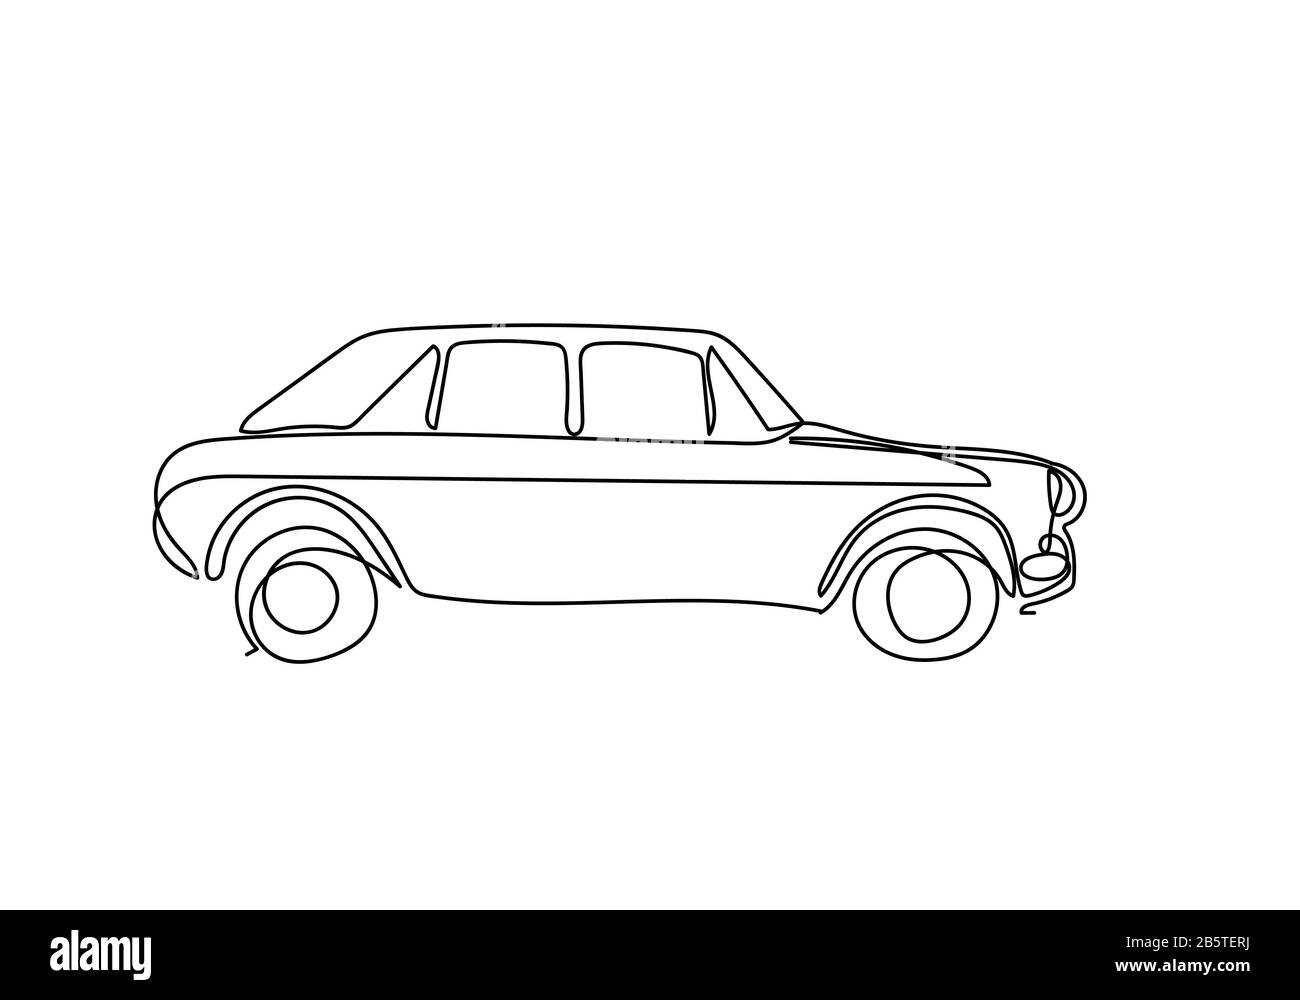 One Single Continuous Line Drawing Of Old Vintage Car Line Draw Design Illustration Stock Photo Alamy